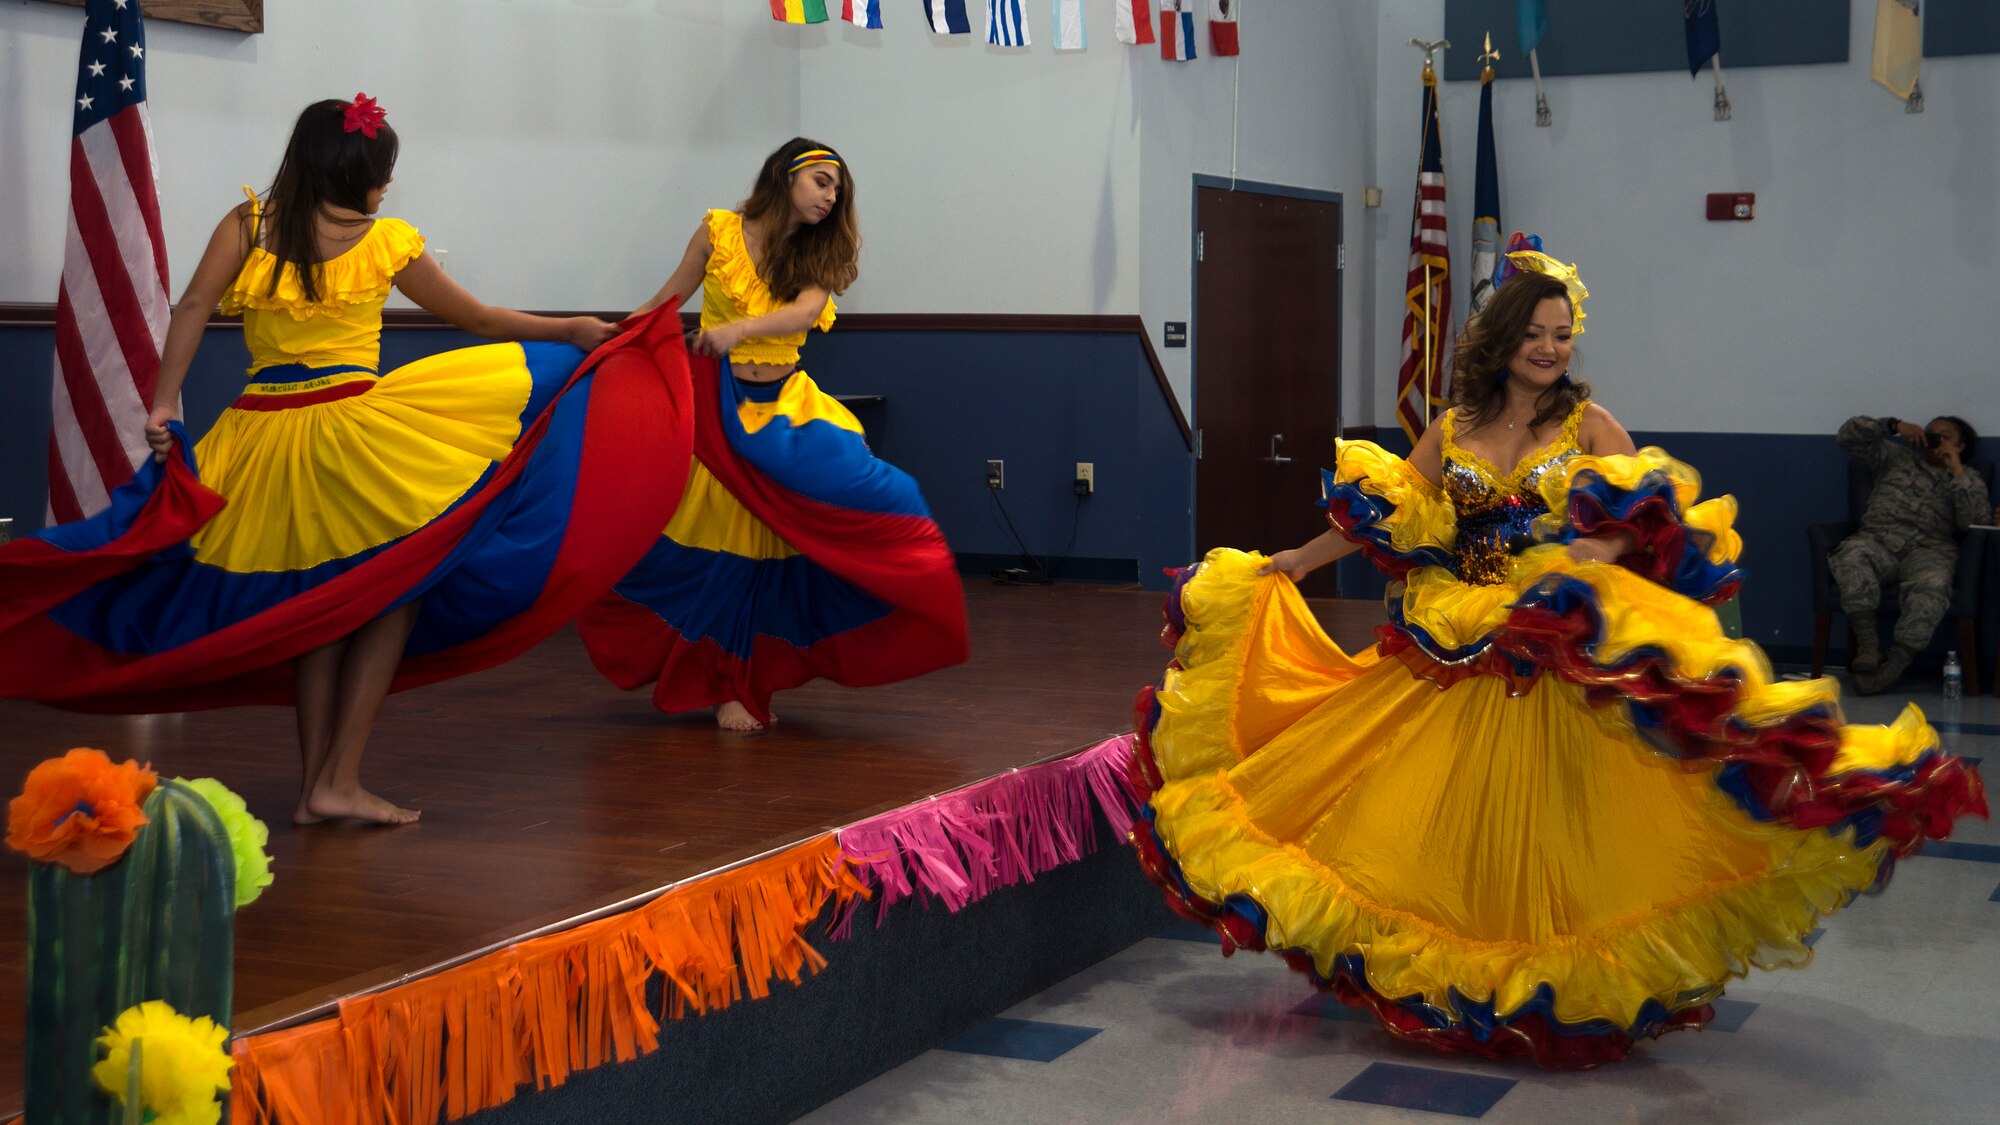 Columbian group Son de Café dances at the National Hispanic Heritage month luncheon at MacDill Air Force Base, Fla., Oct. 11, 2018.